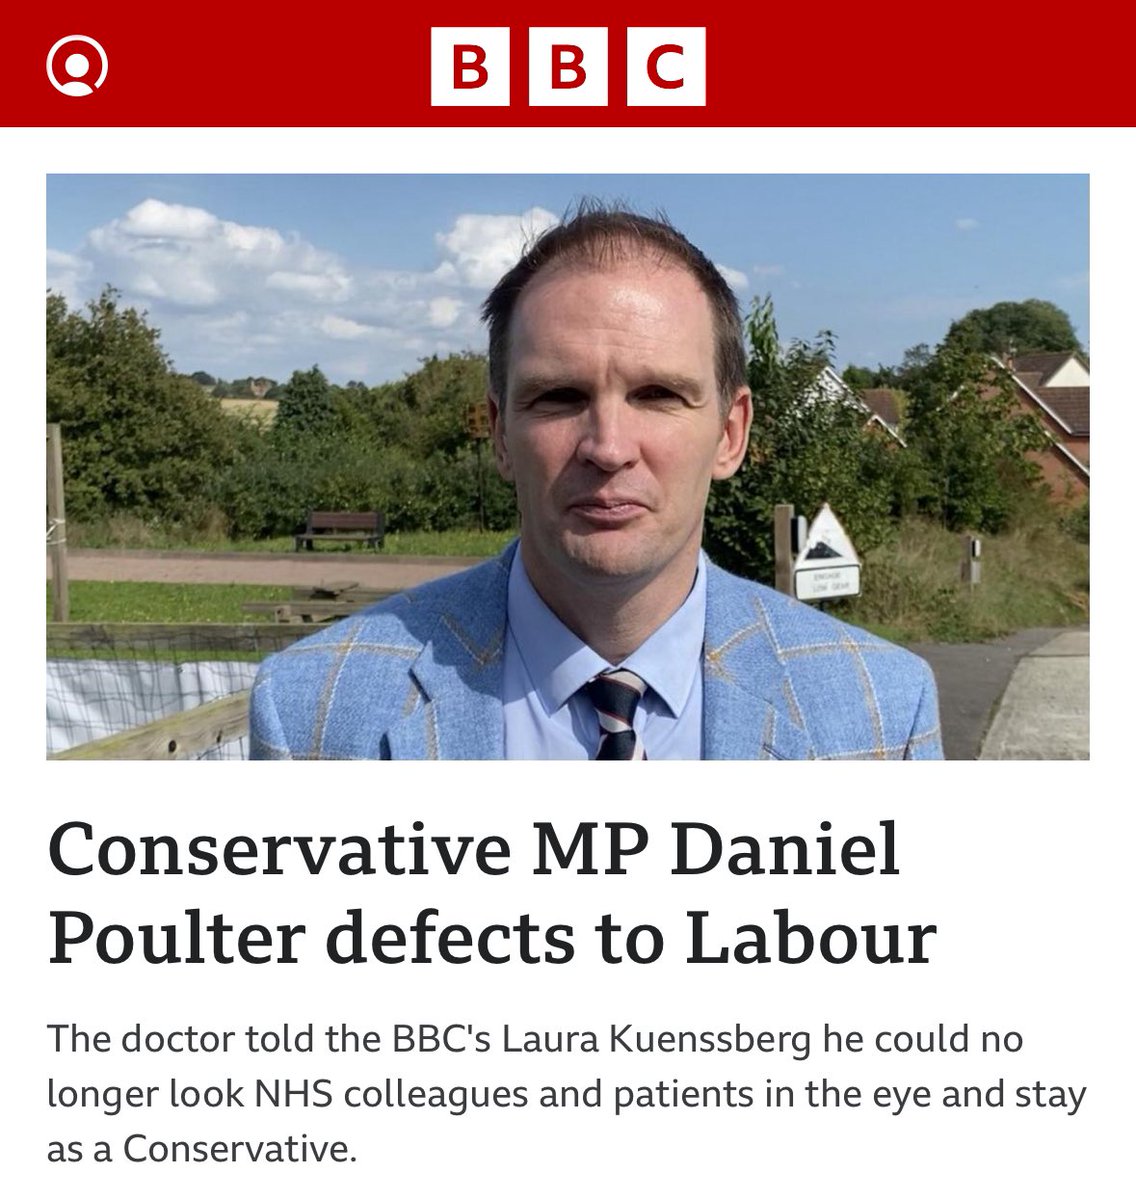 So Daniel just found his “conscience”, a few months before a General Election where Labour are likely to win? Honestly, these people are the WORST of all politicians, just out to save their jobs.